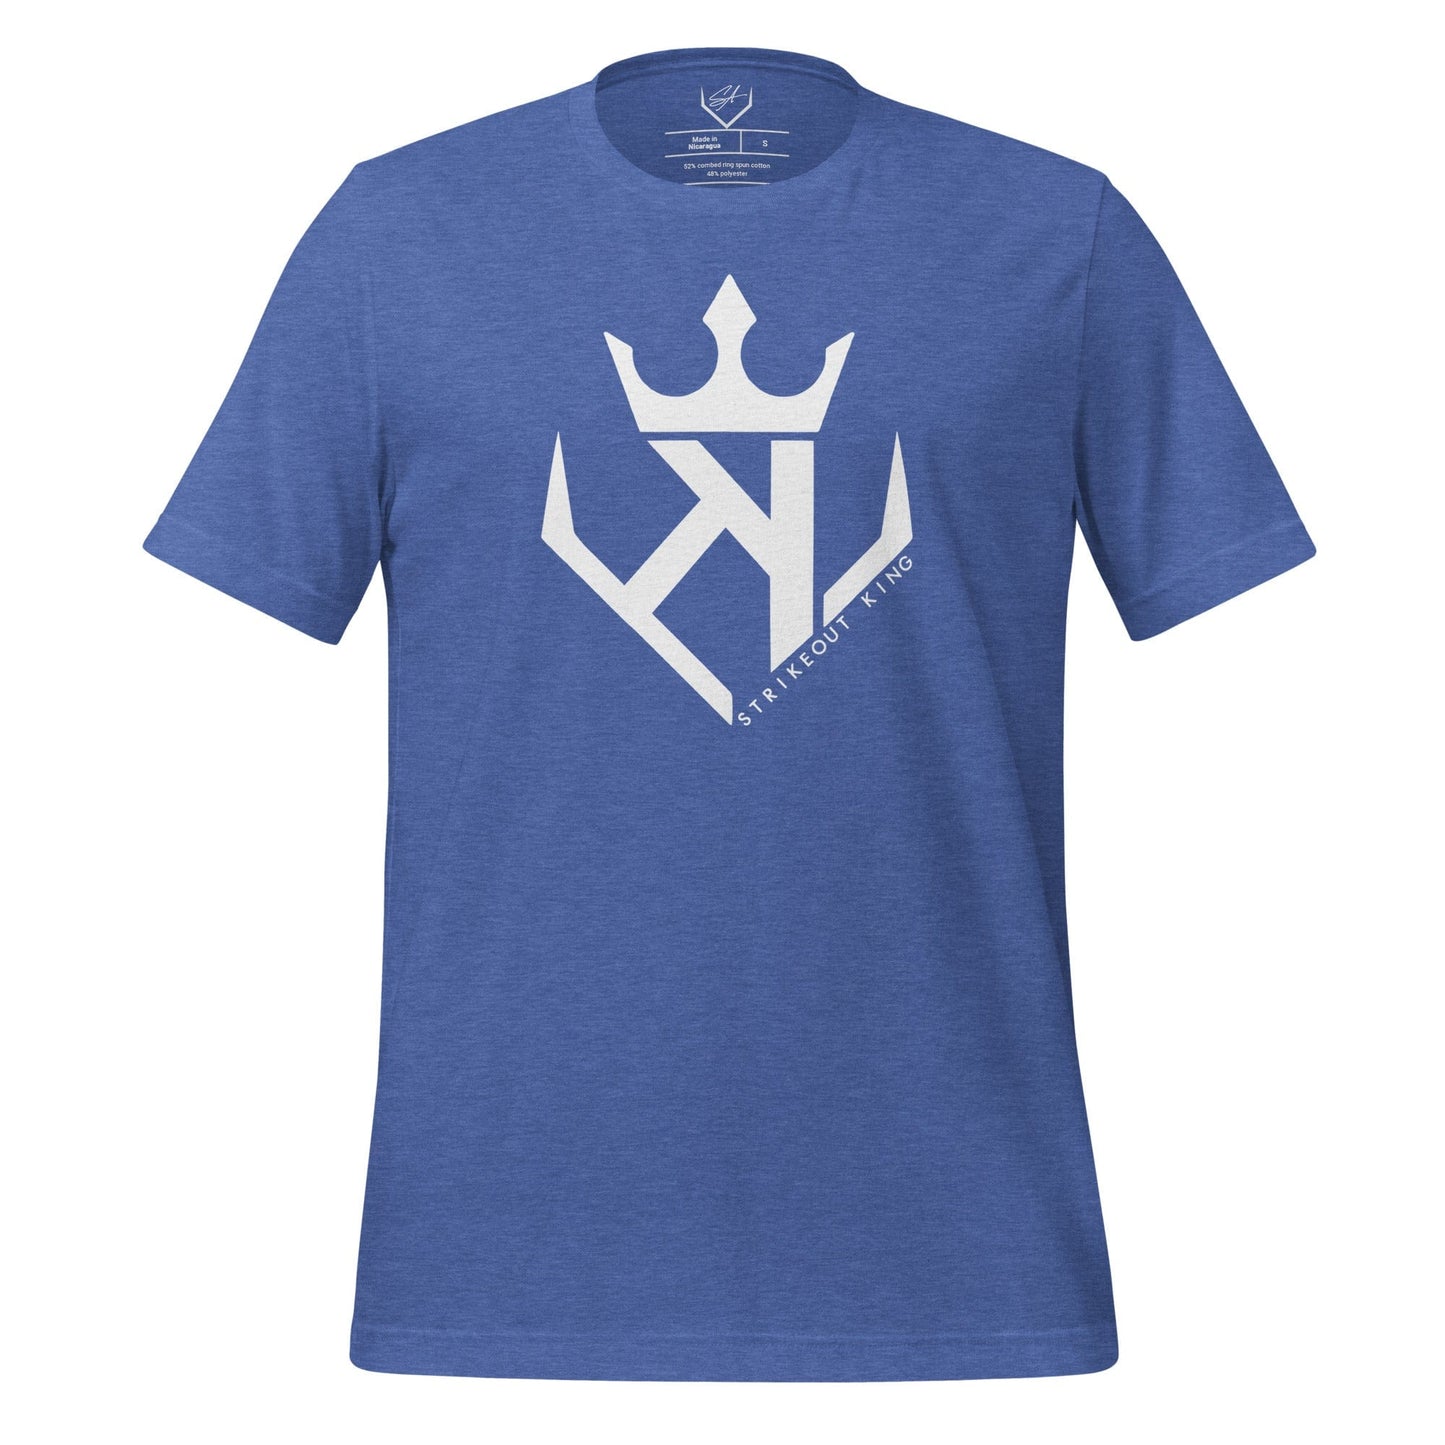 Strikeout King - Adult Tee